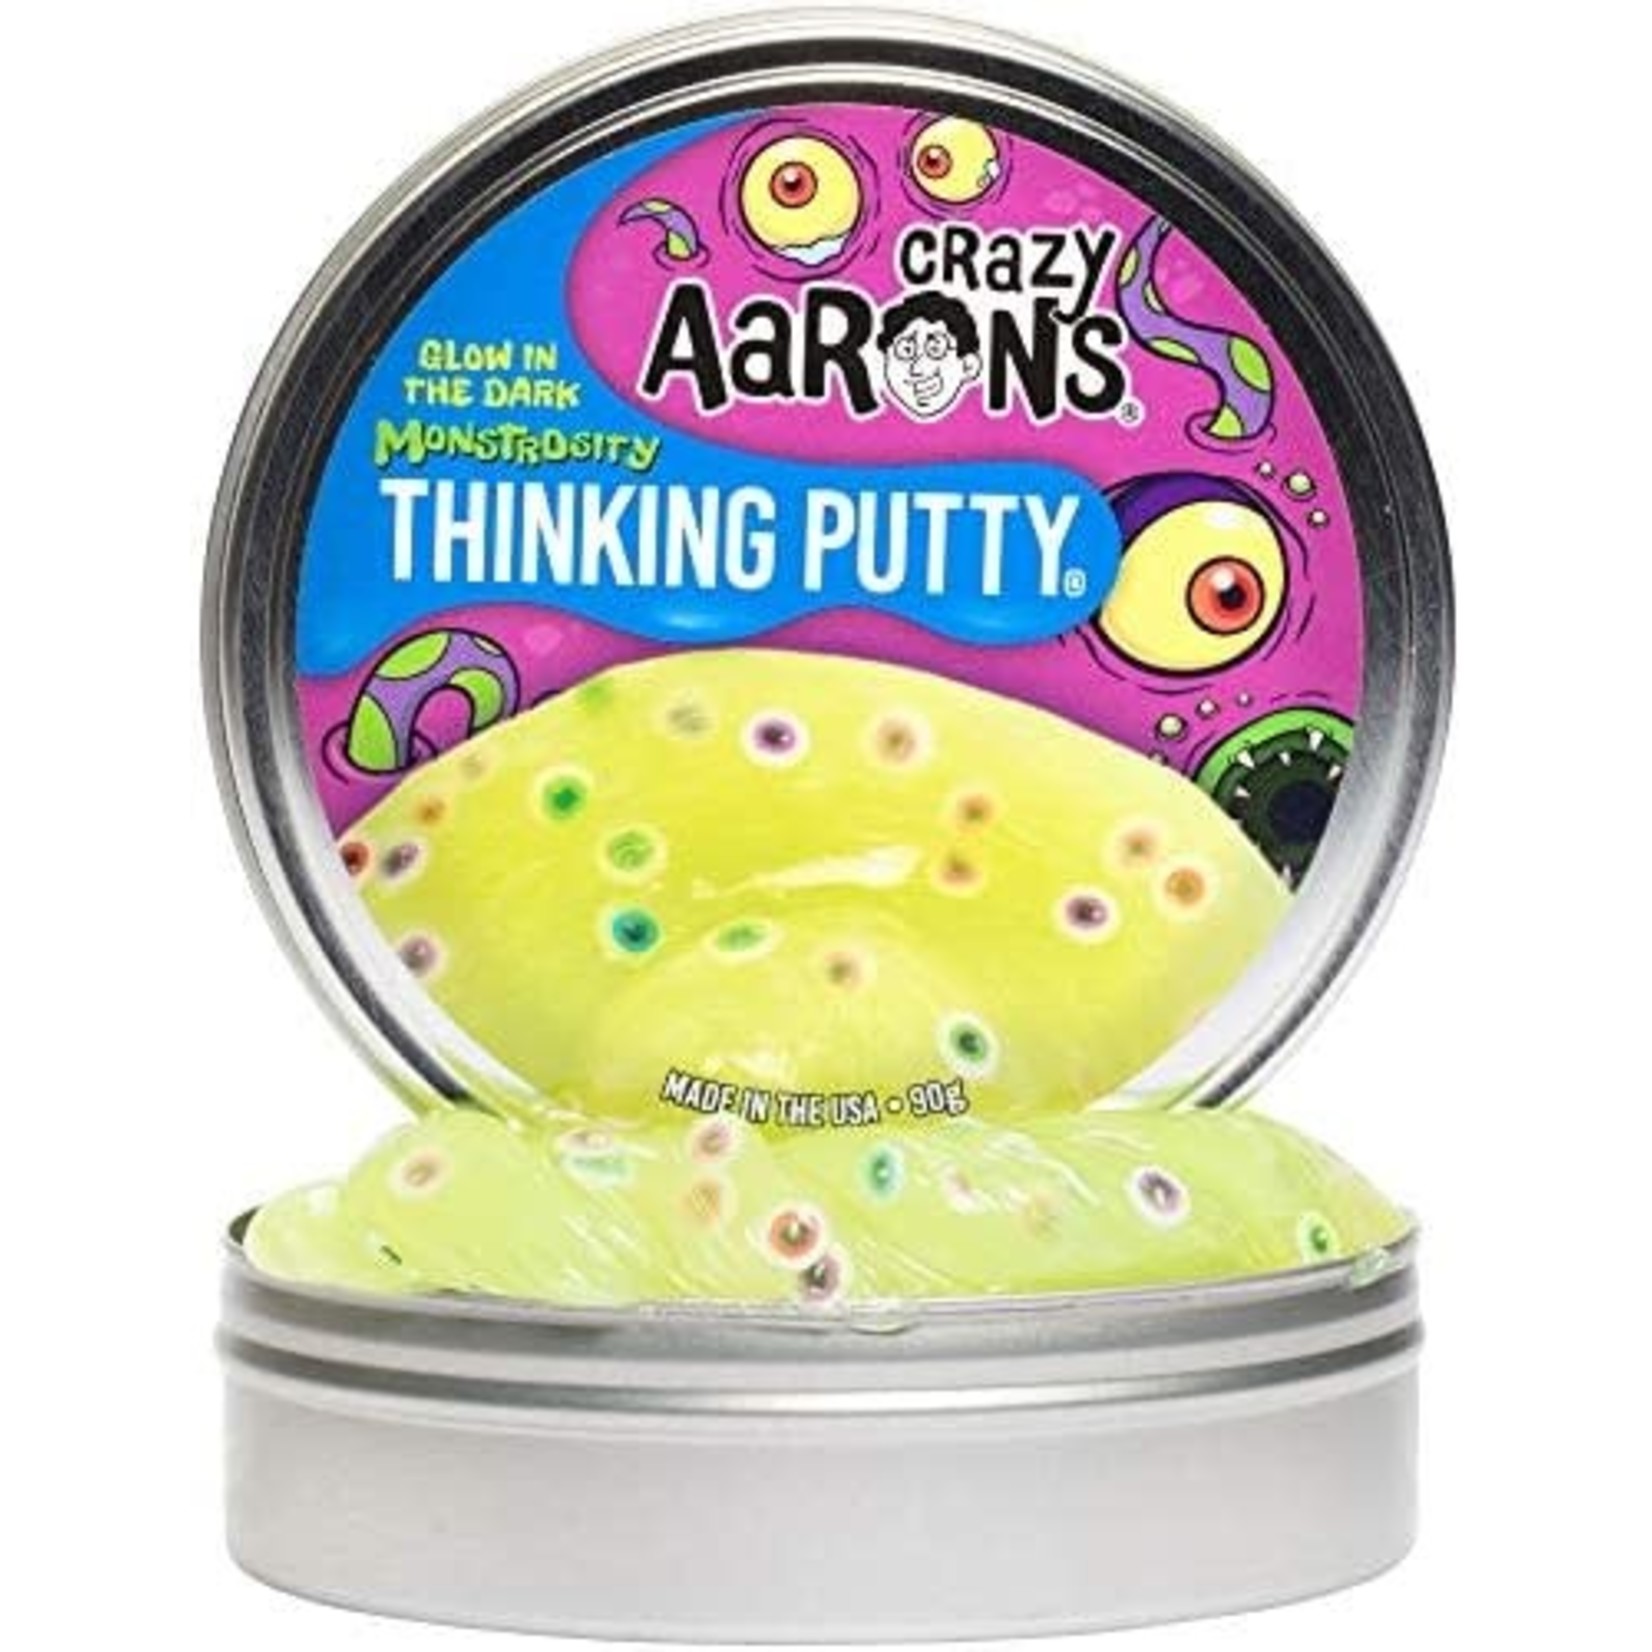 Crazy Aaron's Thinking Putty Monstrosity Thinking Putty